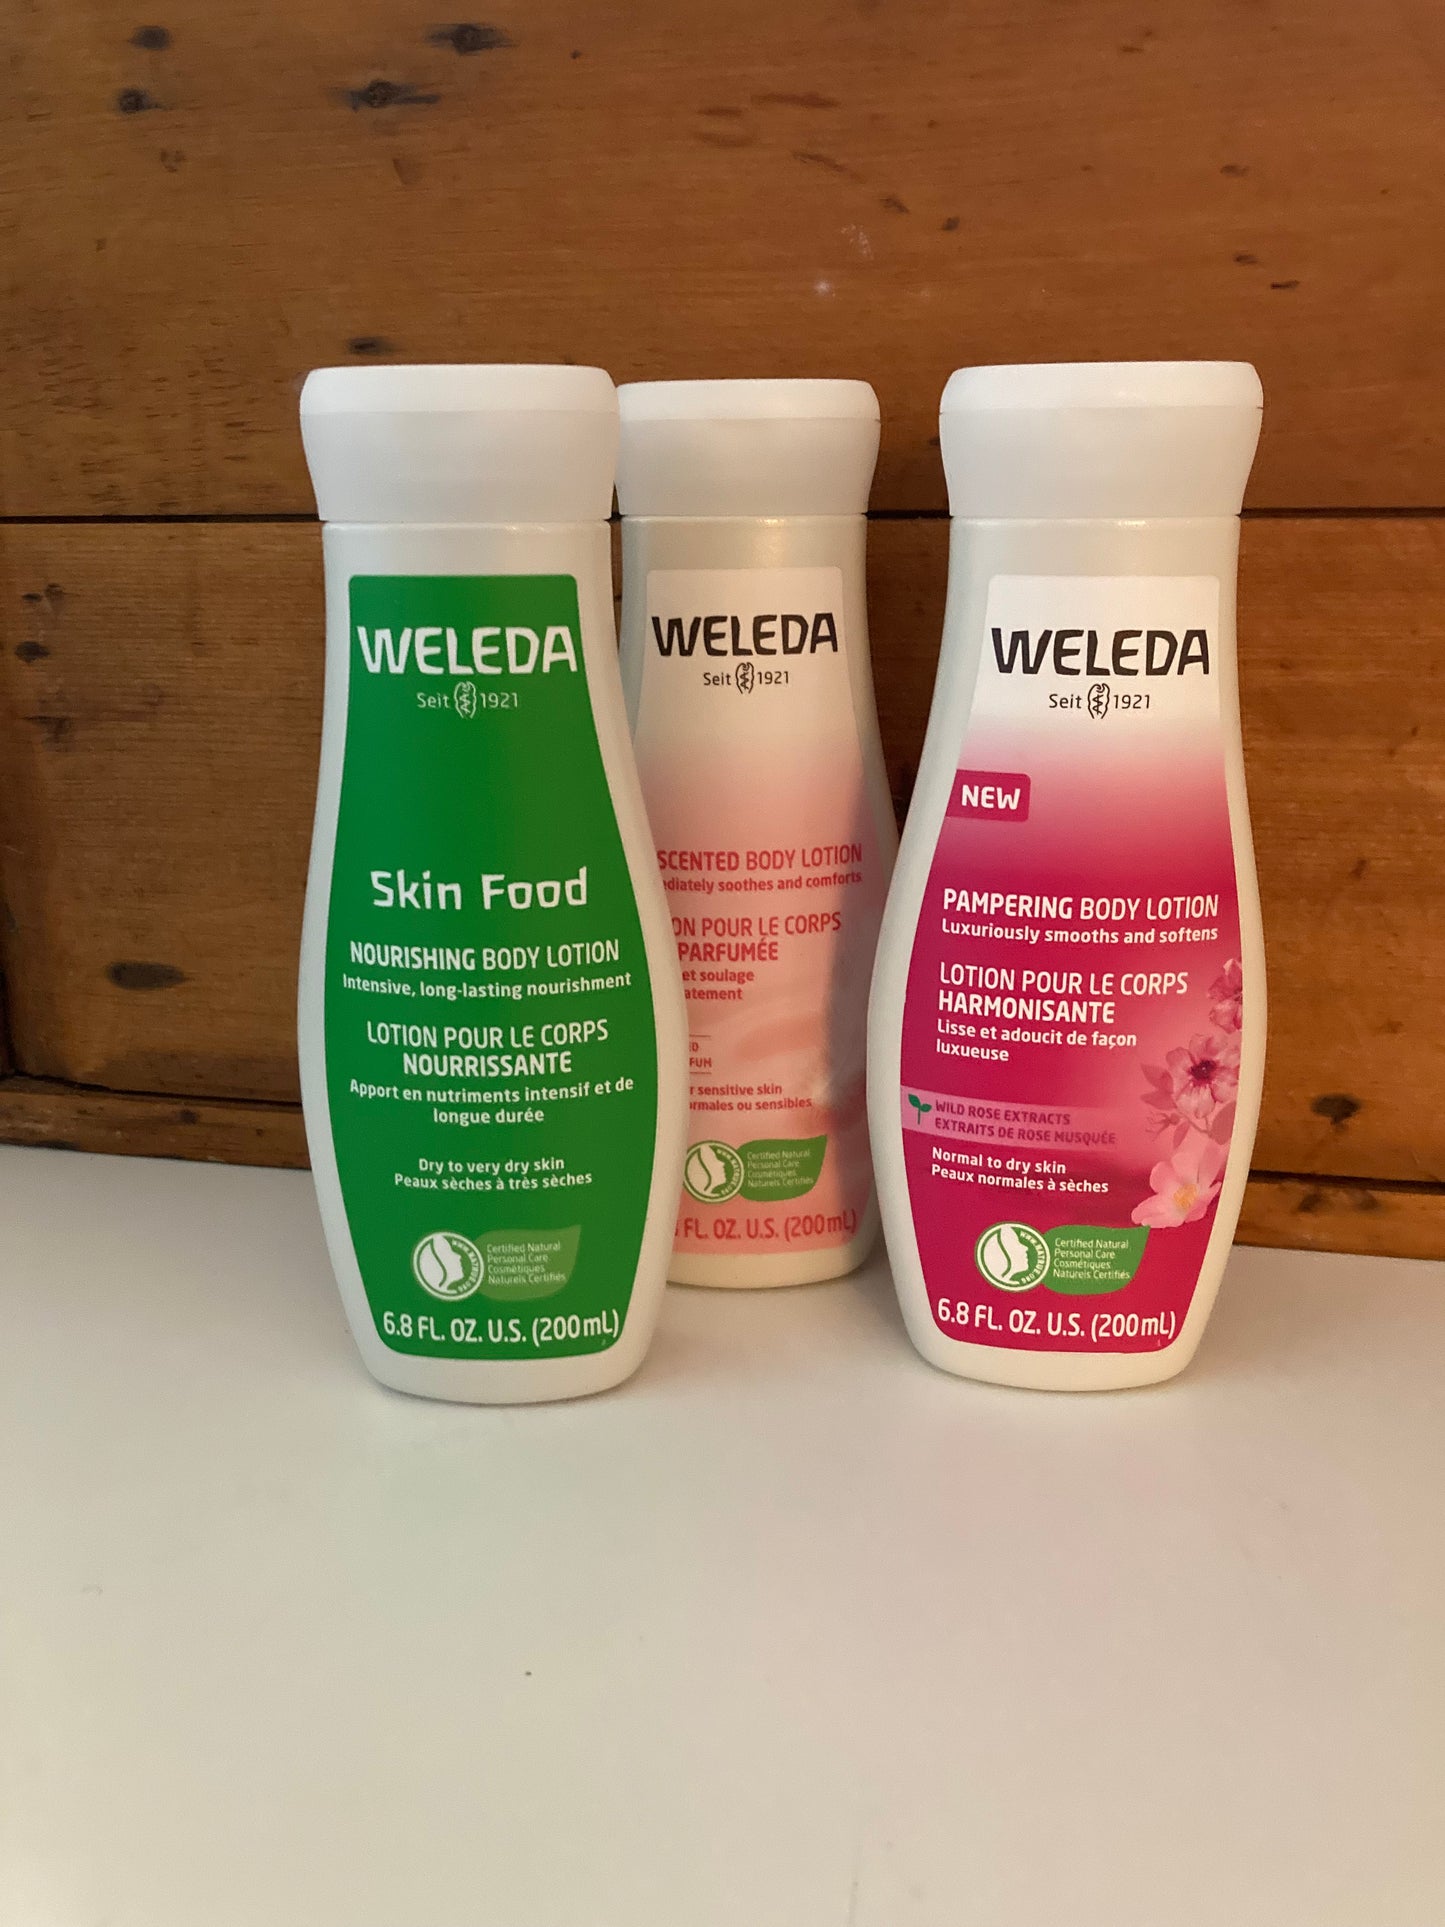 Weleda BODY LOTION, UNSCENTED… New!